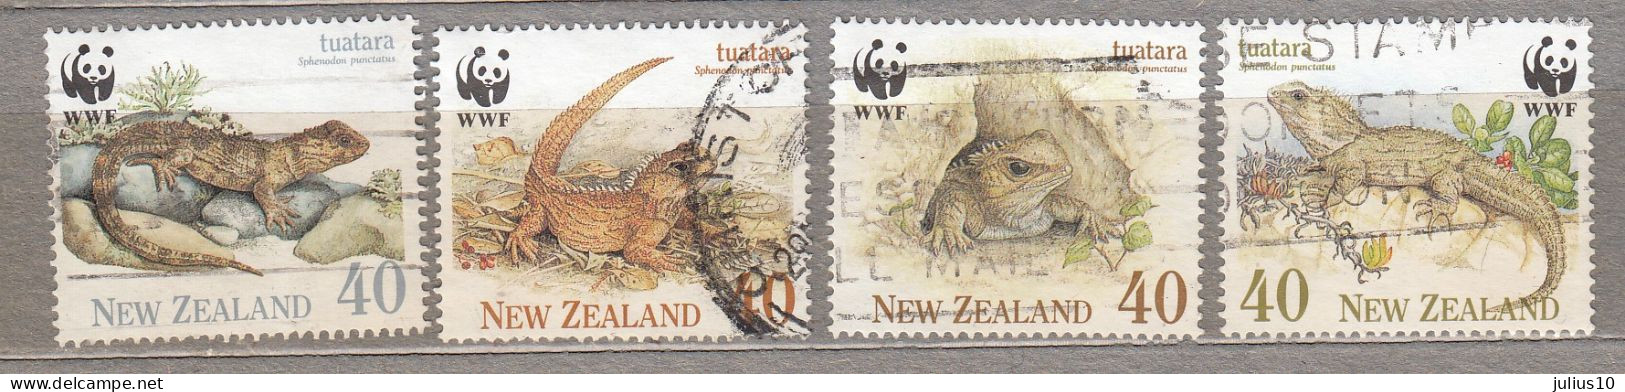 NEW ZEALAND 1991 WWF Reptiles Used(o) Mi 1160-1163   #34168 - Used Stamps